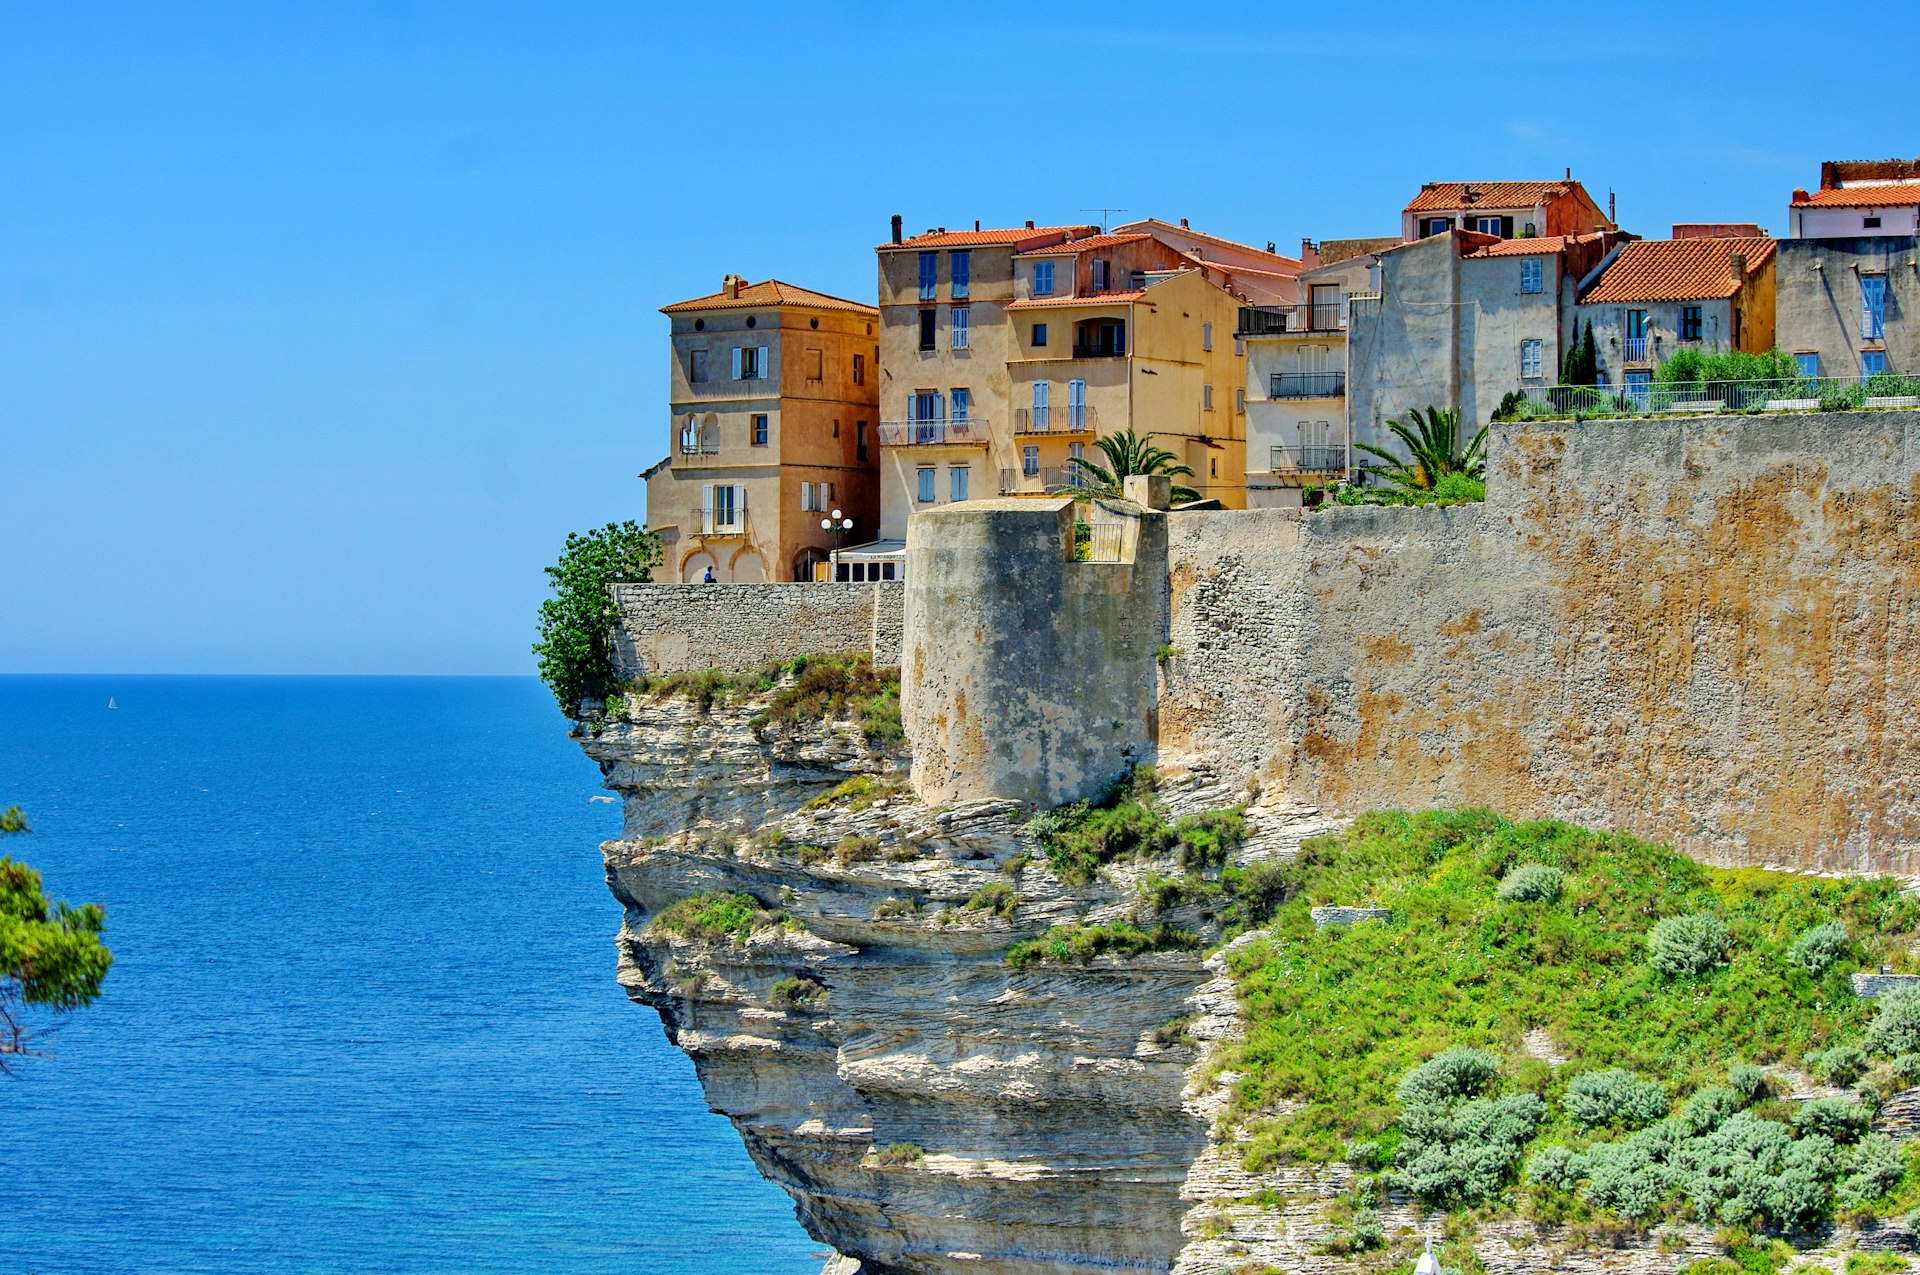 Houses clustered together on the edge of a cliff in Bonifacio, Corsica